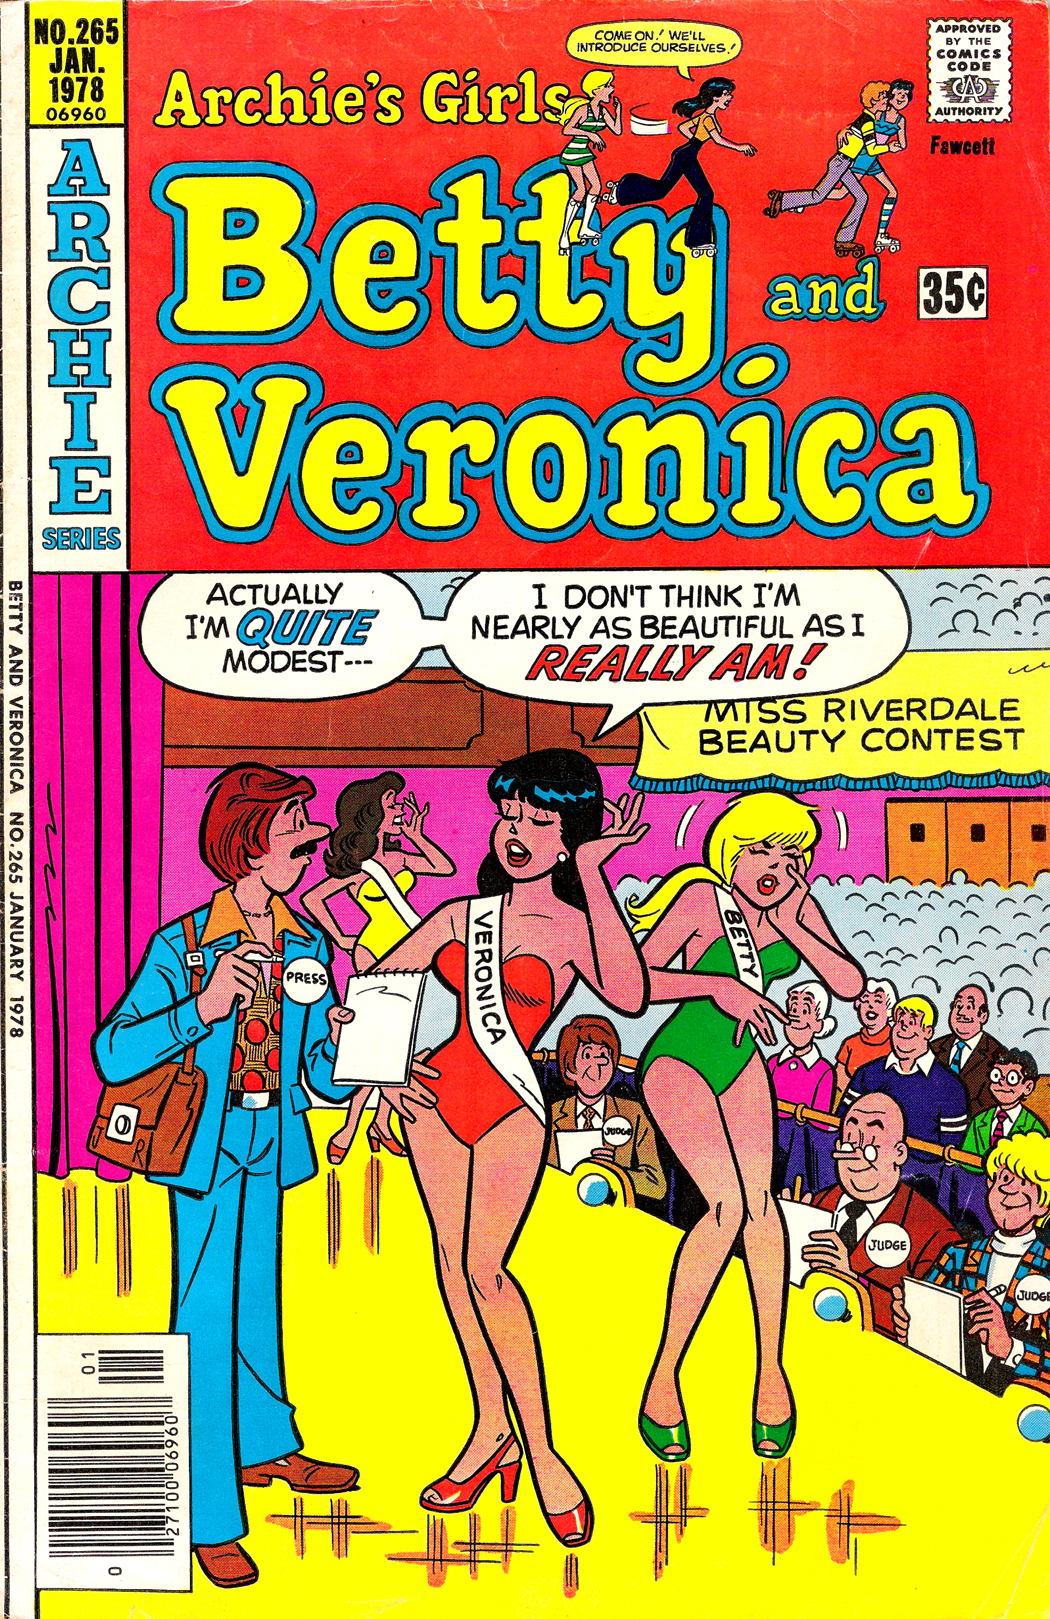 Read online Archie's Girls Betty and Veronica comic -  Issue #265 - 1